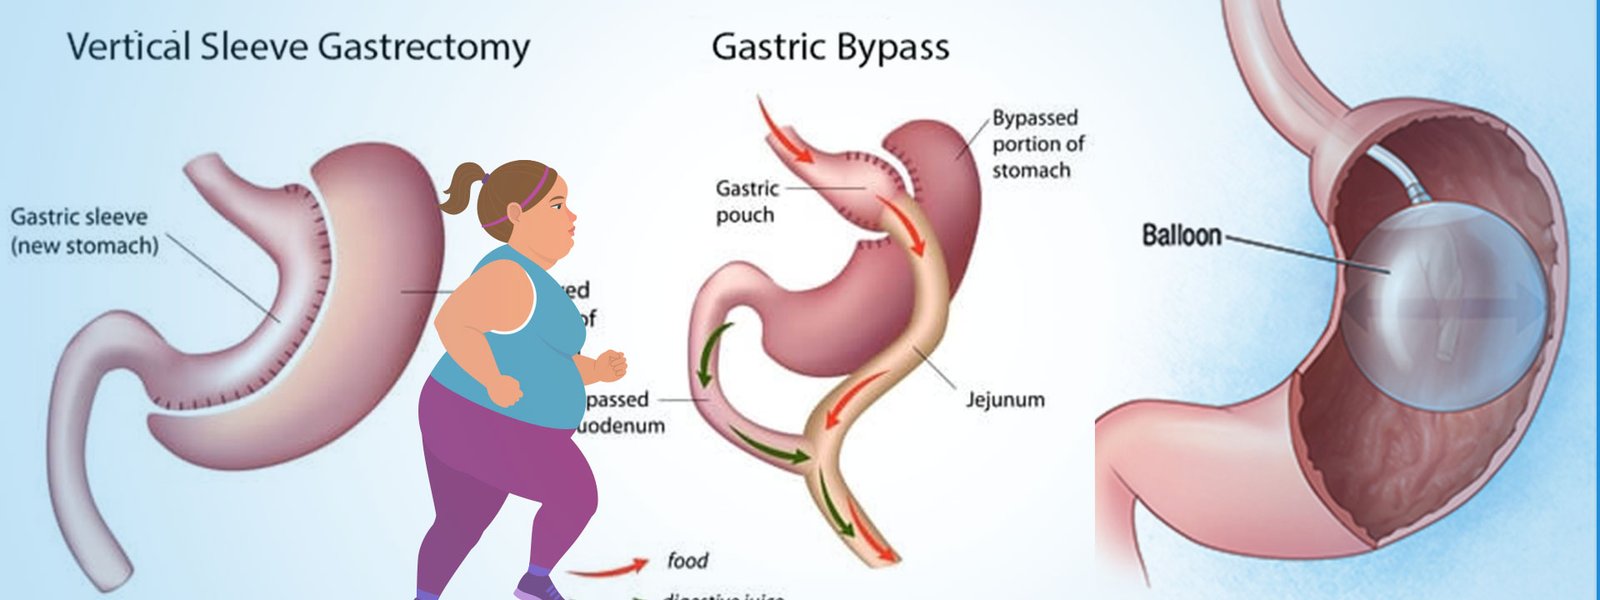 Bariatric Medical procedure for weighting